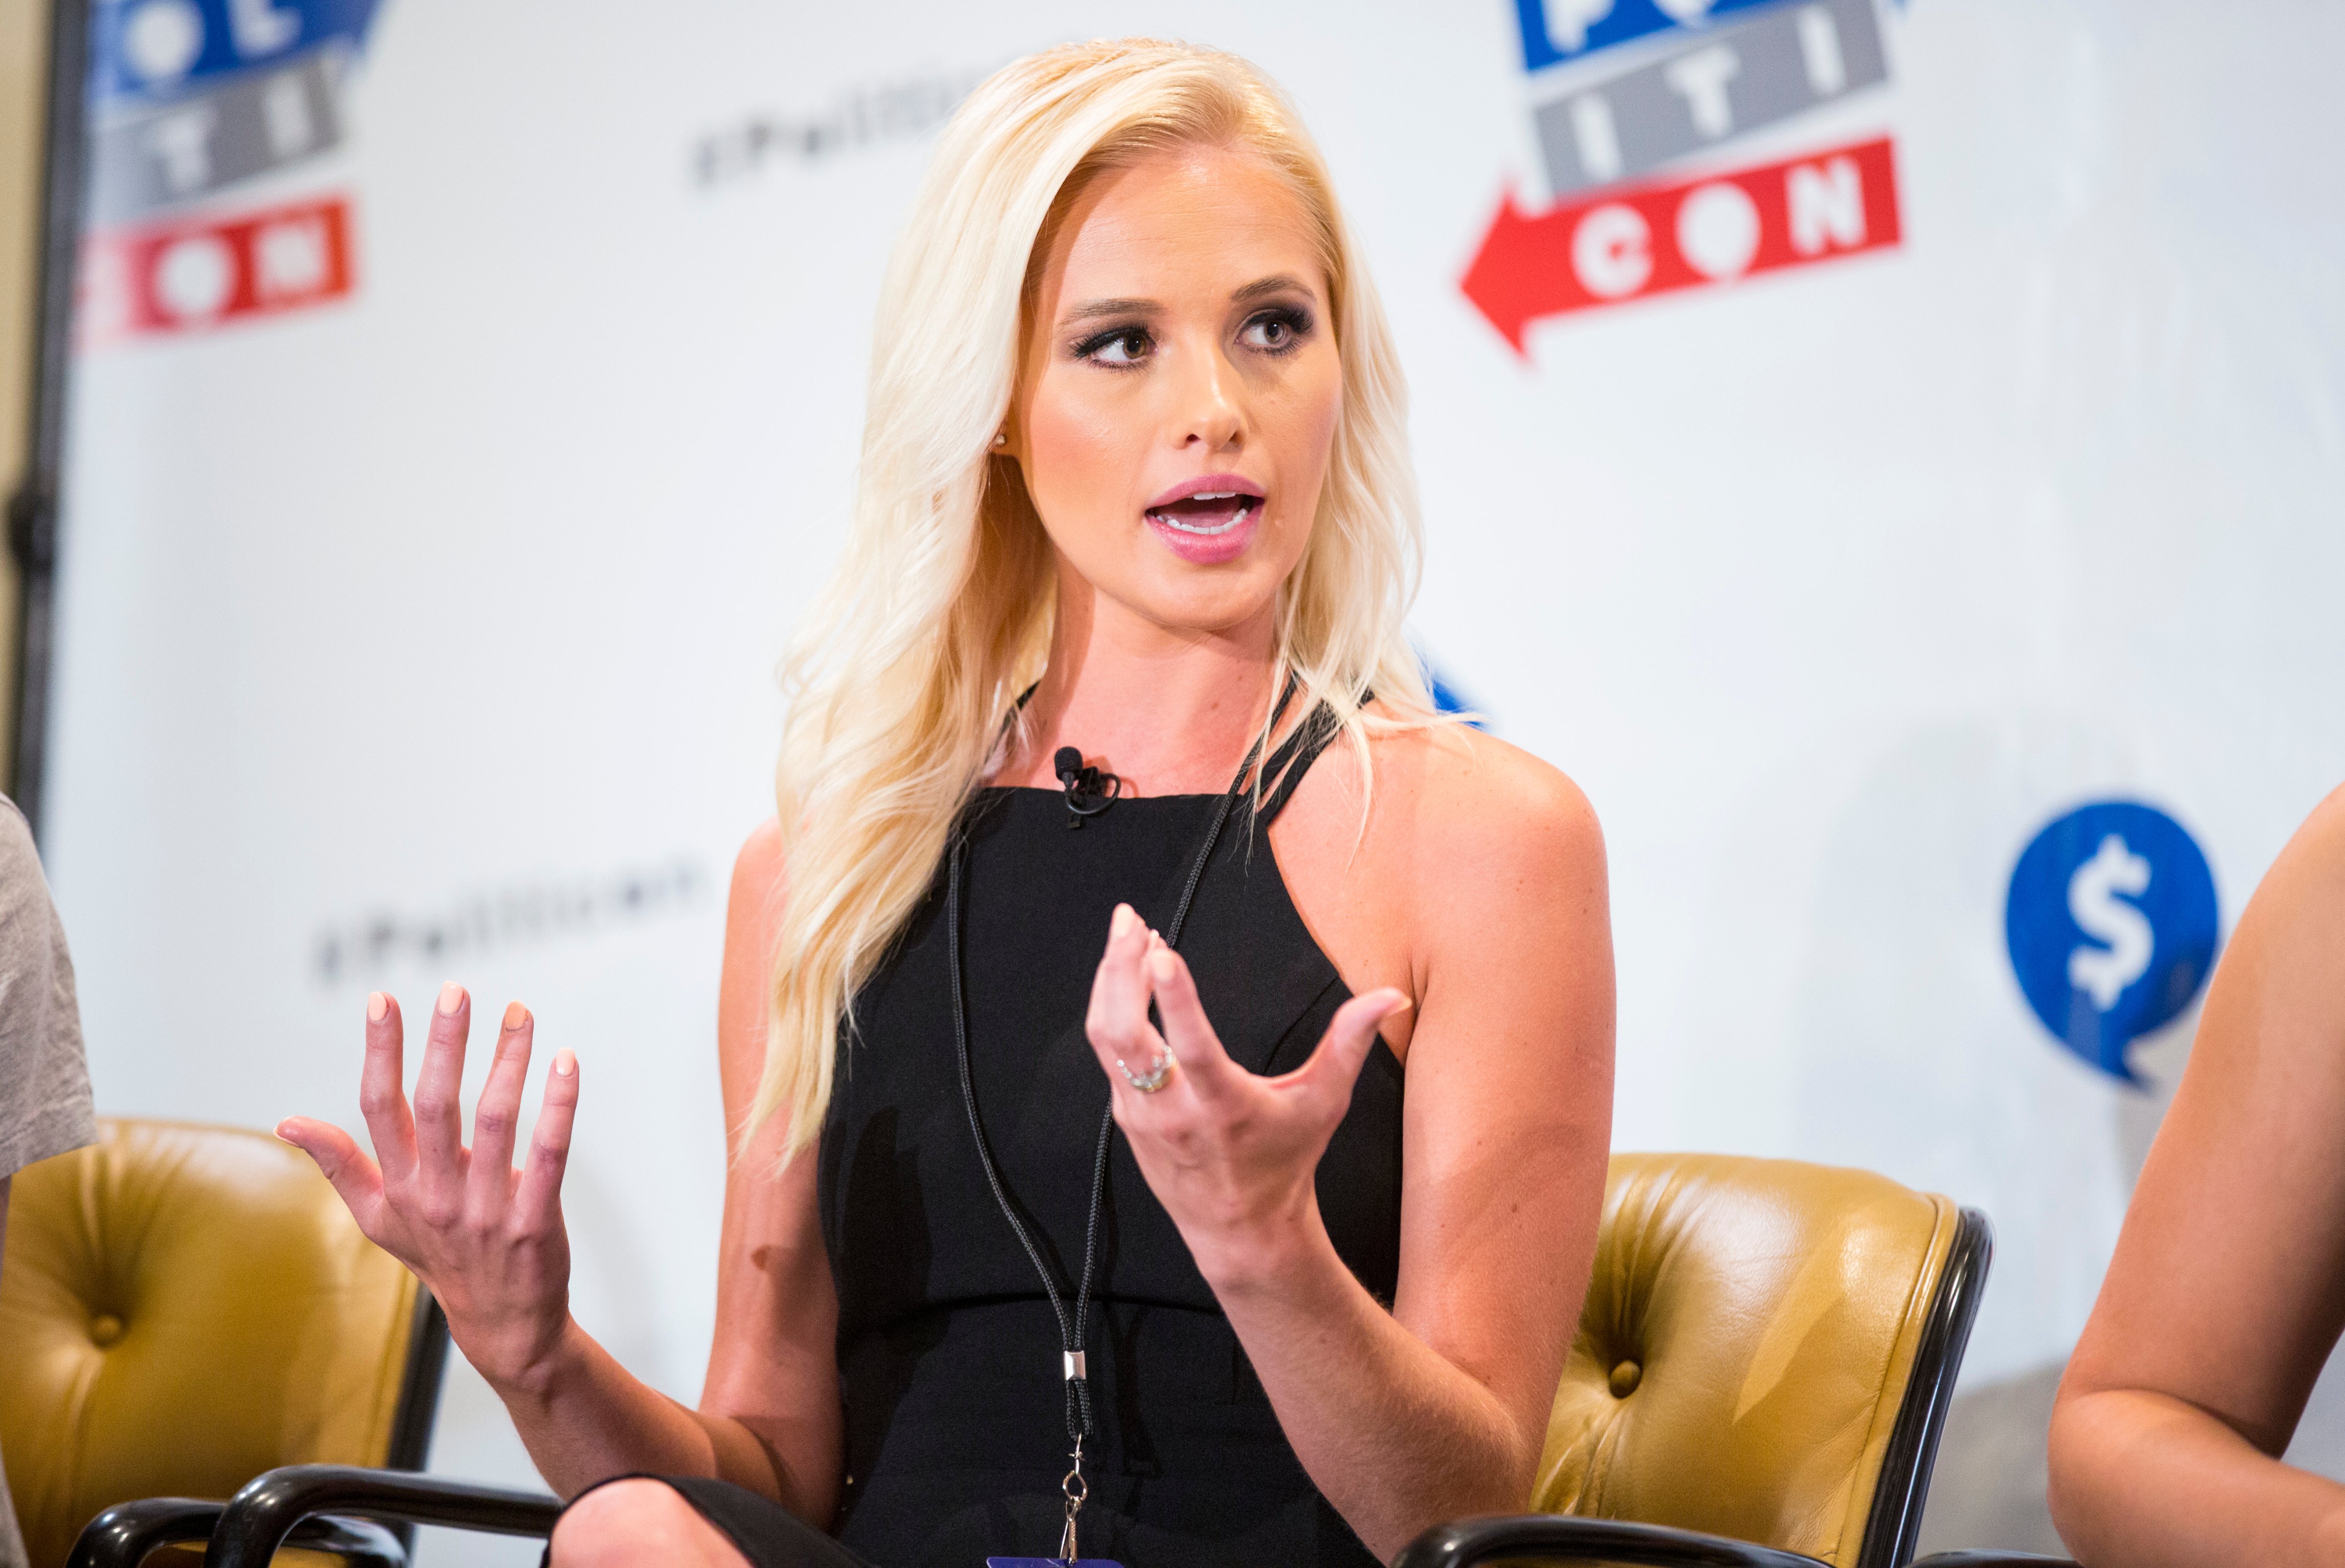 Tomi Lahren seen at Politicon 2016 at The Pasadena Convention Center on Saturday, June 25, 2016, in Pasadena, CA. (Colin Young-Wolff—Invision/AP)